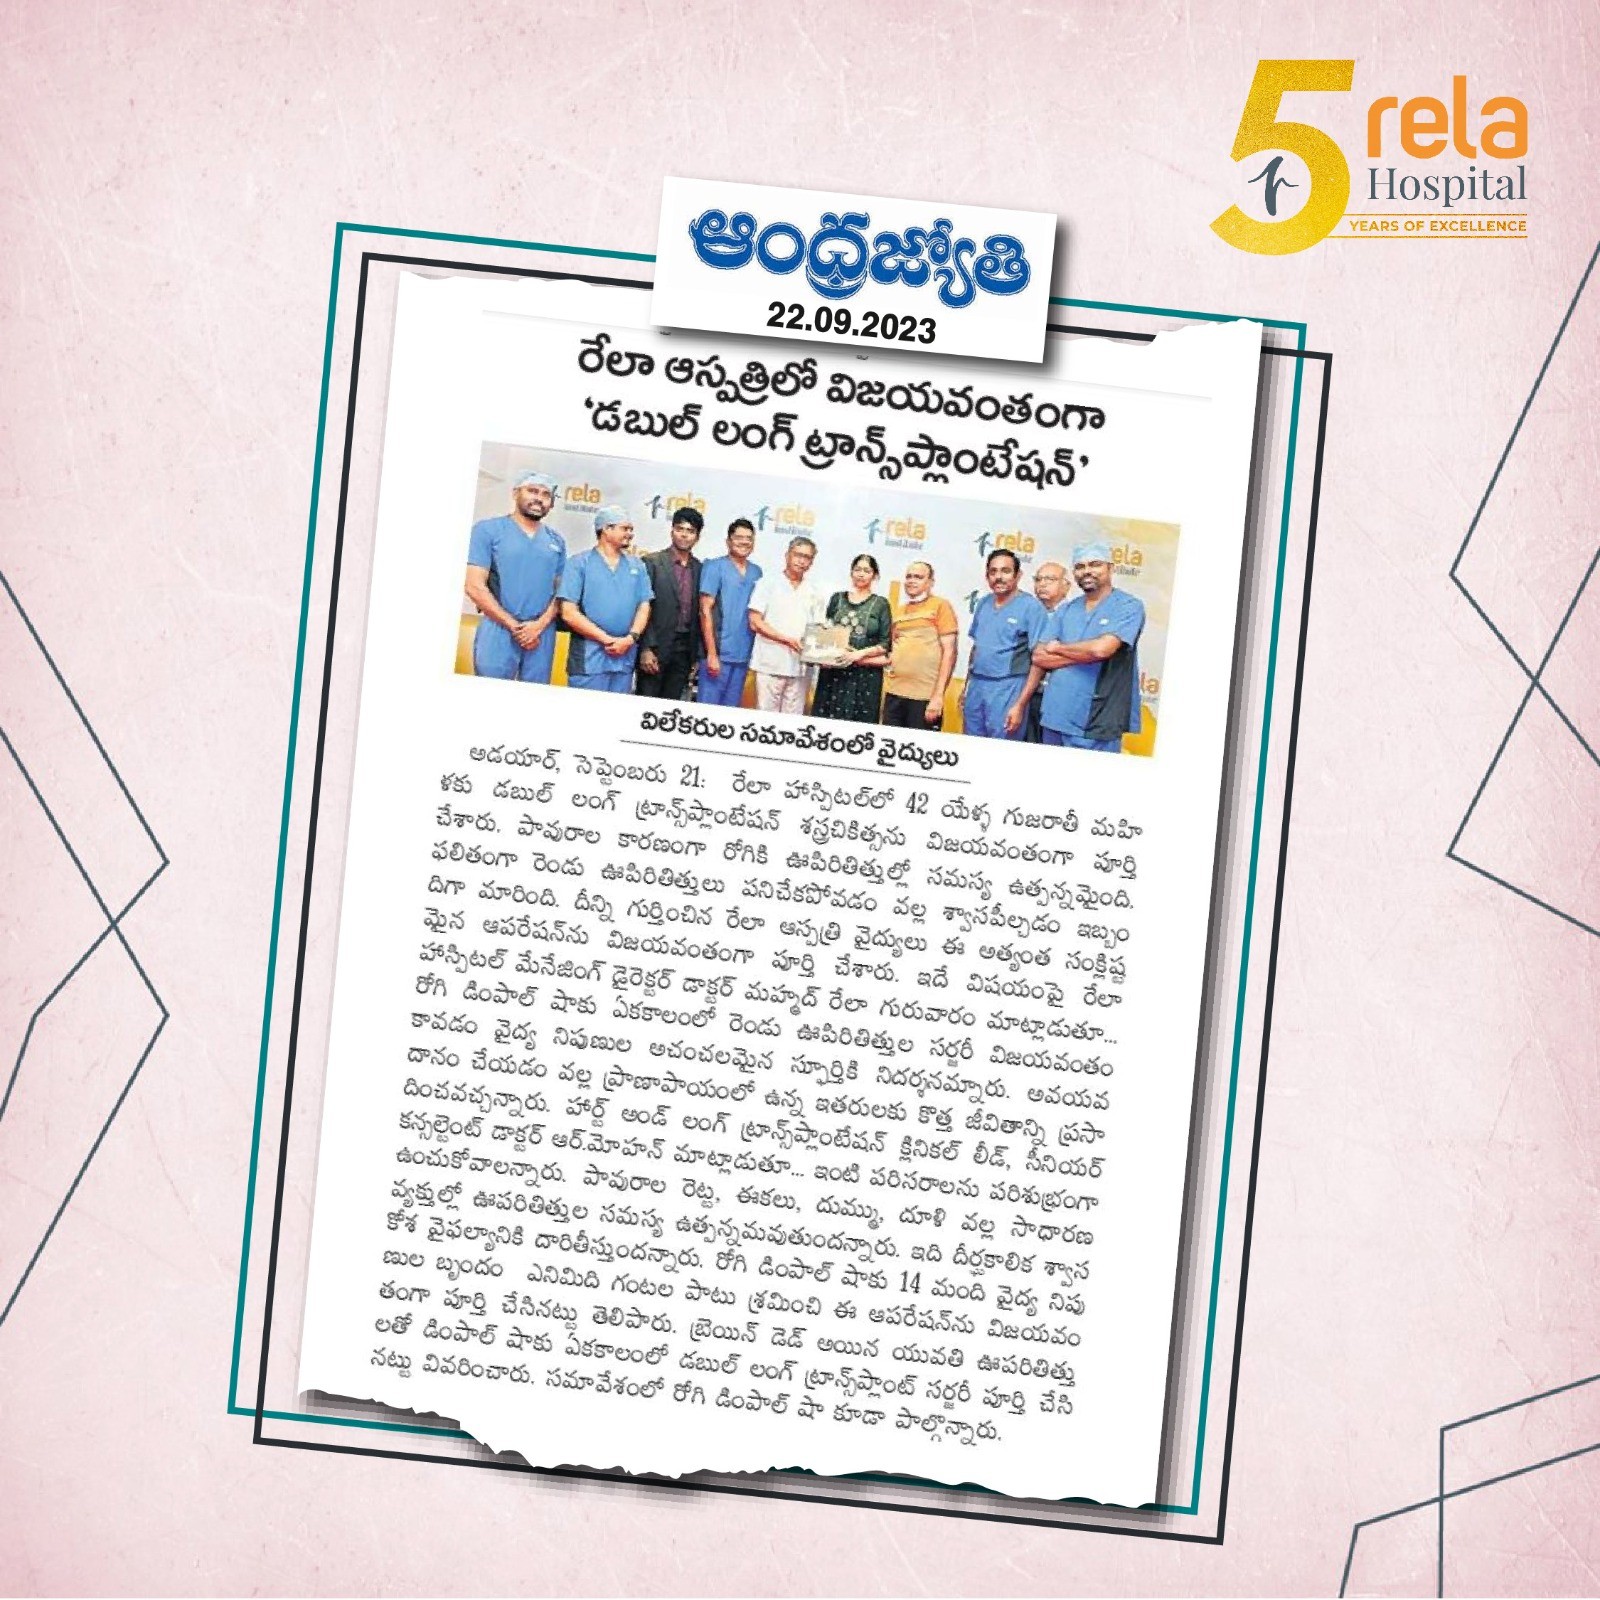 Rela Hospital Performs Successful Double Lung Transplant Surgery on a 42-year-old Gujarati Woman